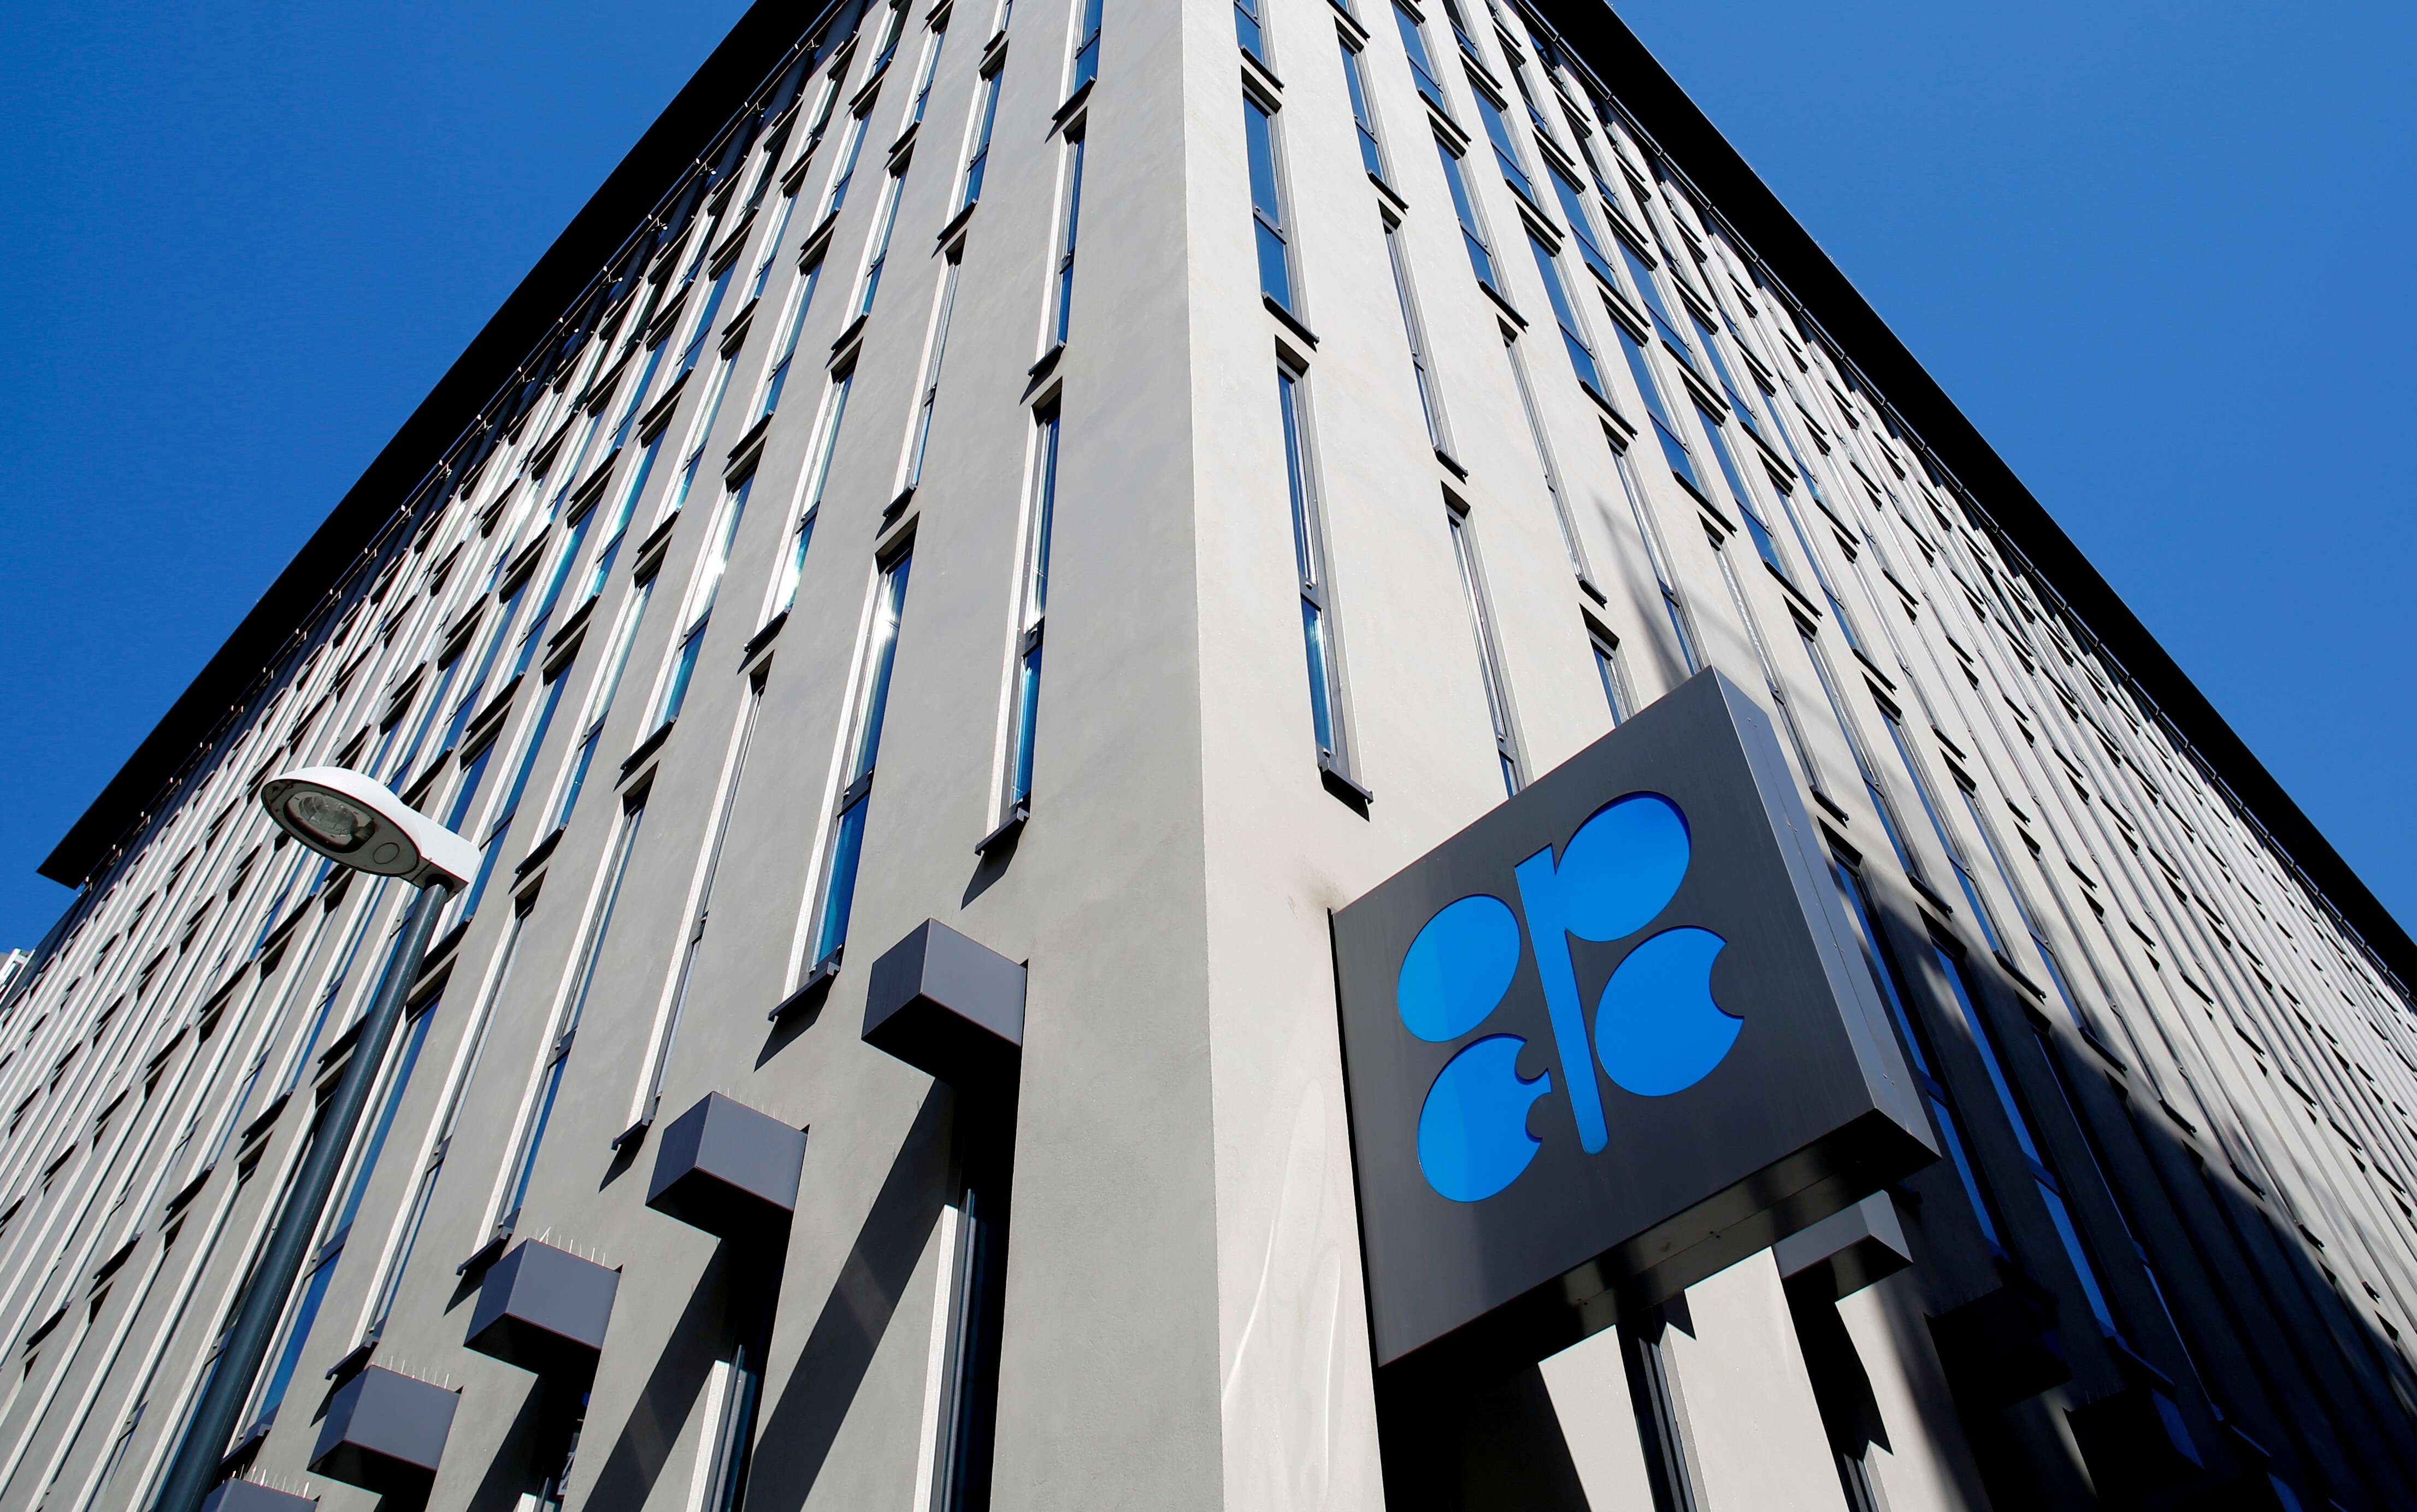 Opec’s headquarters in Vienna, Austria. Biden’s policy choices will be critical in the outlook for the Middle East’s oil and gas producers. Photo: Reuters